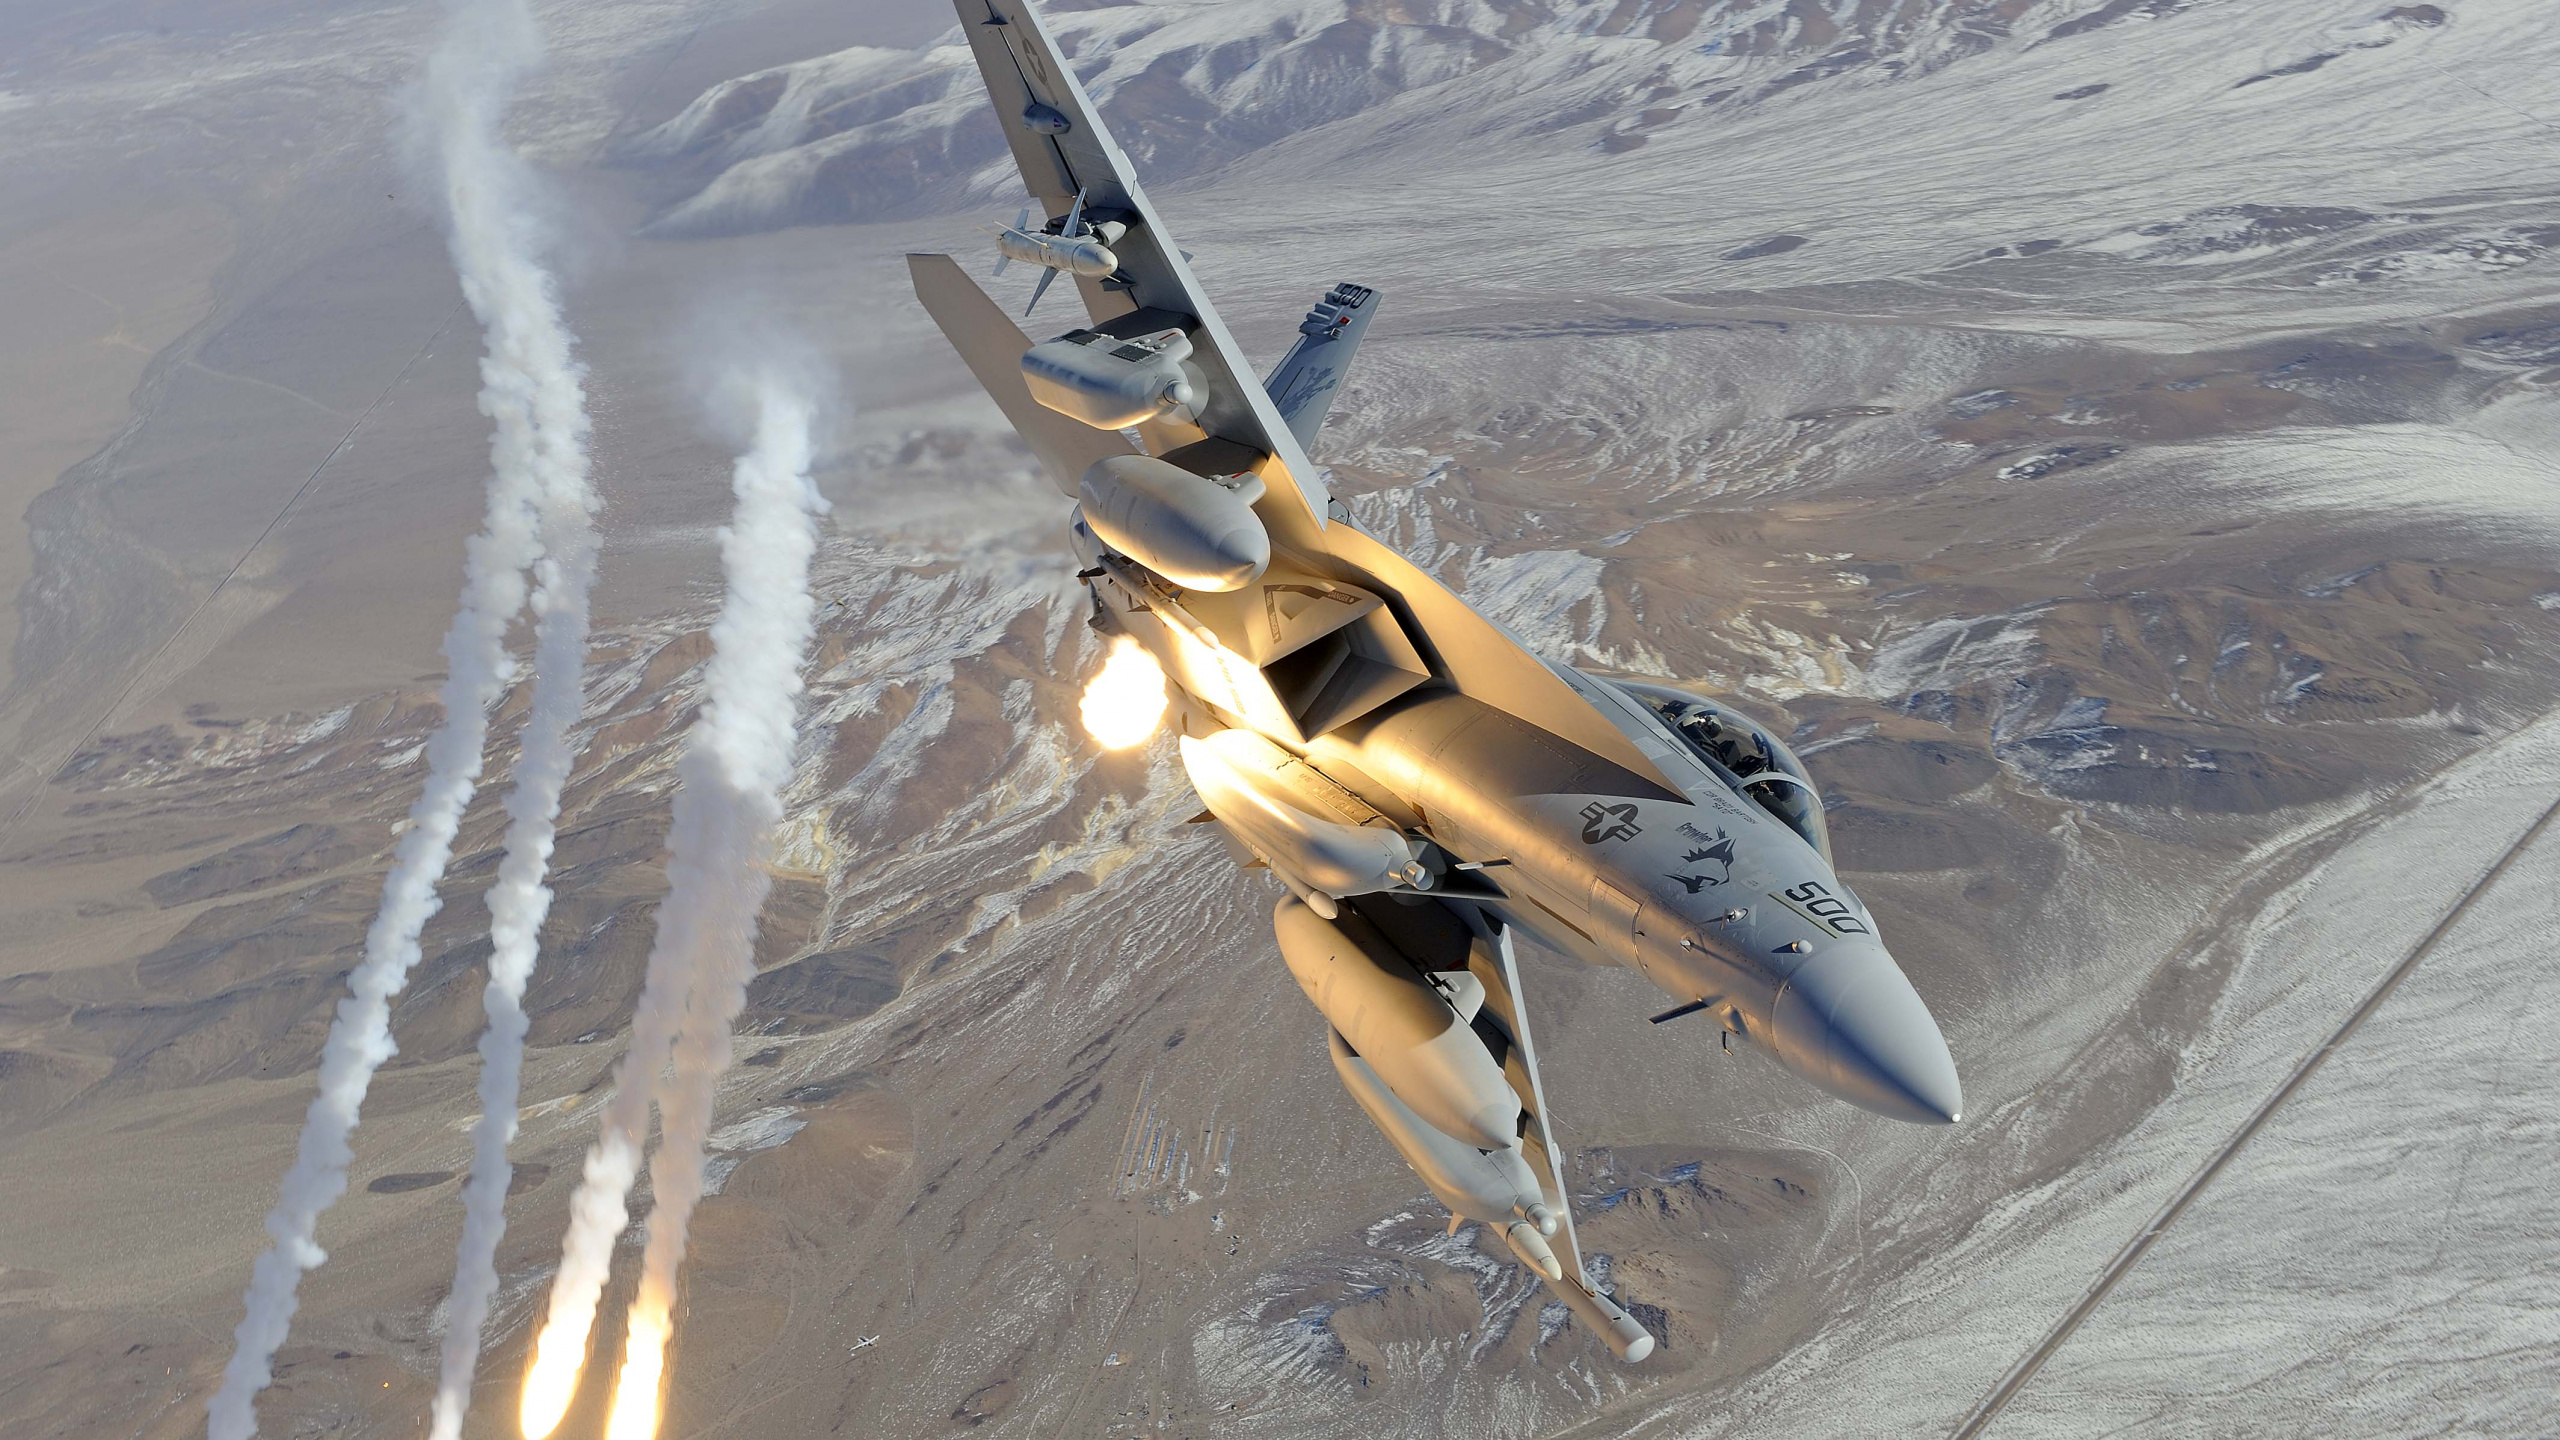 Gray Fighter Jet on Snow Covered Ground During Daytime. Wallpaper in 2560x1440 Resolution